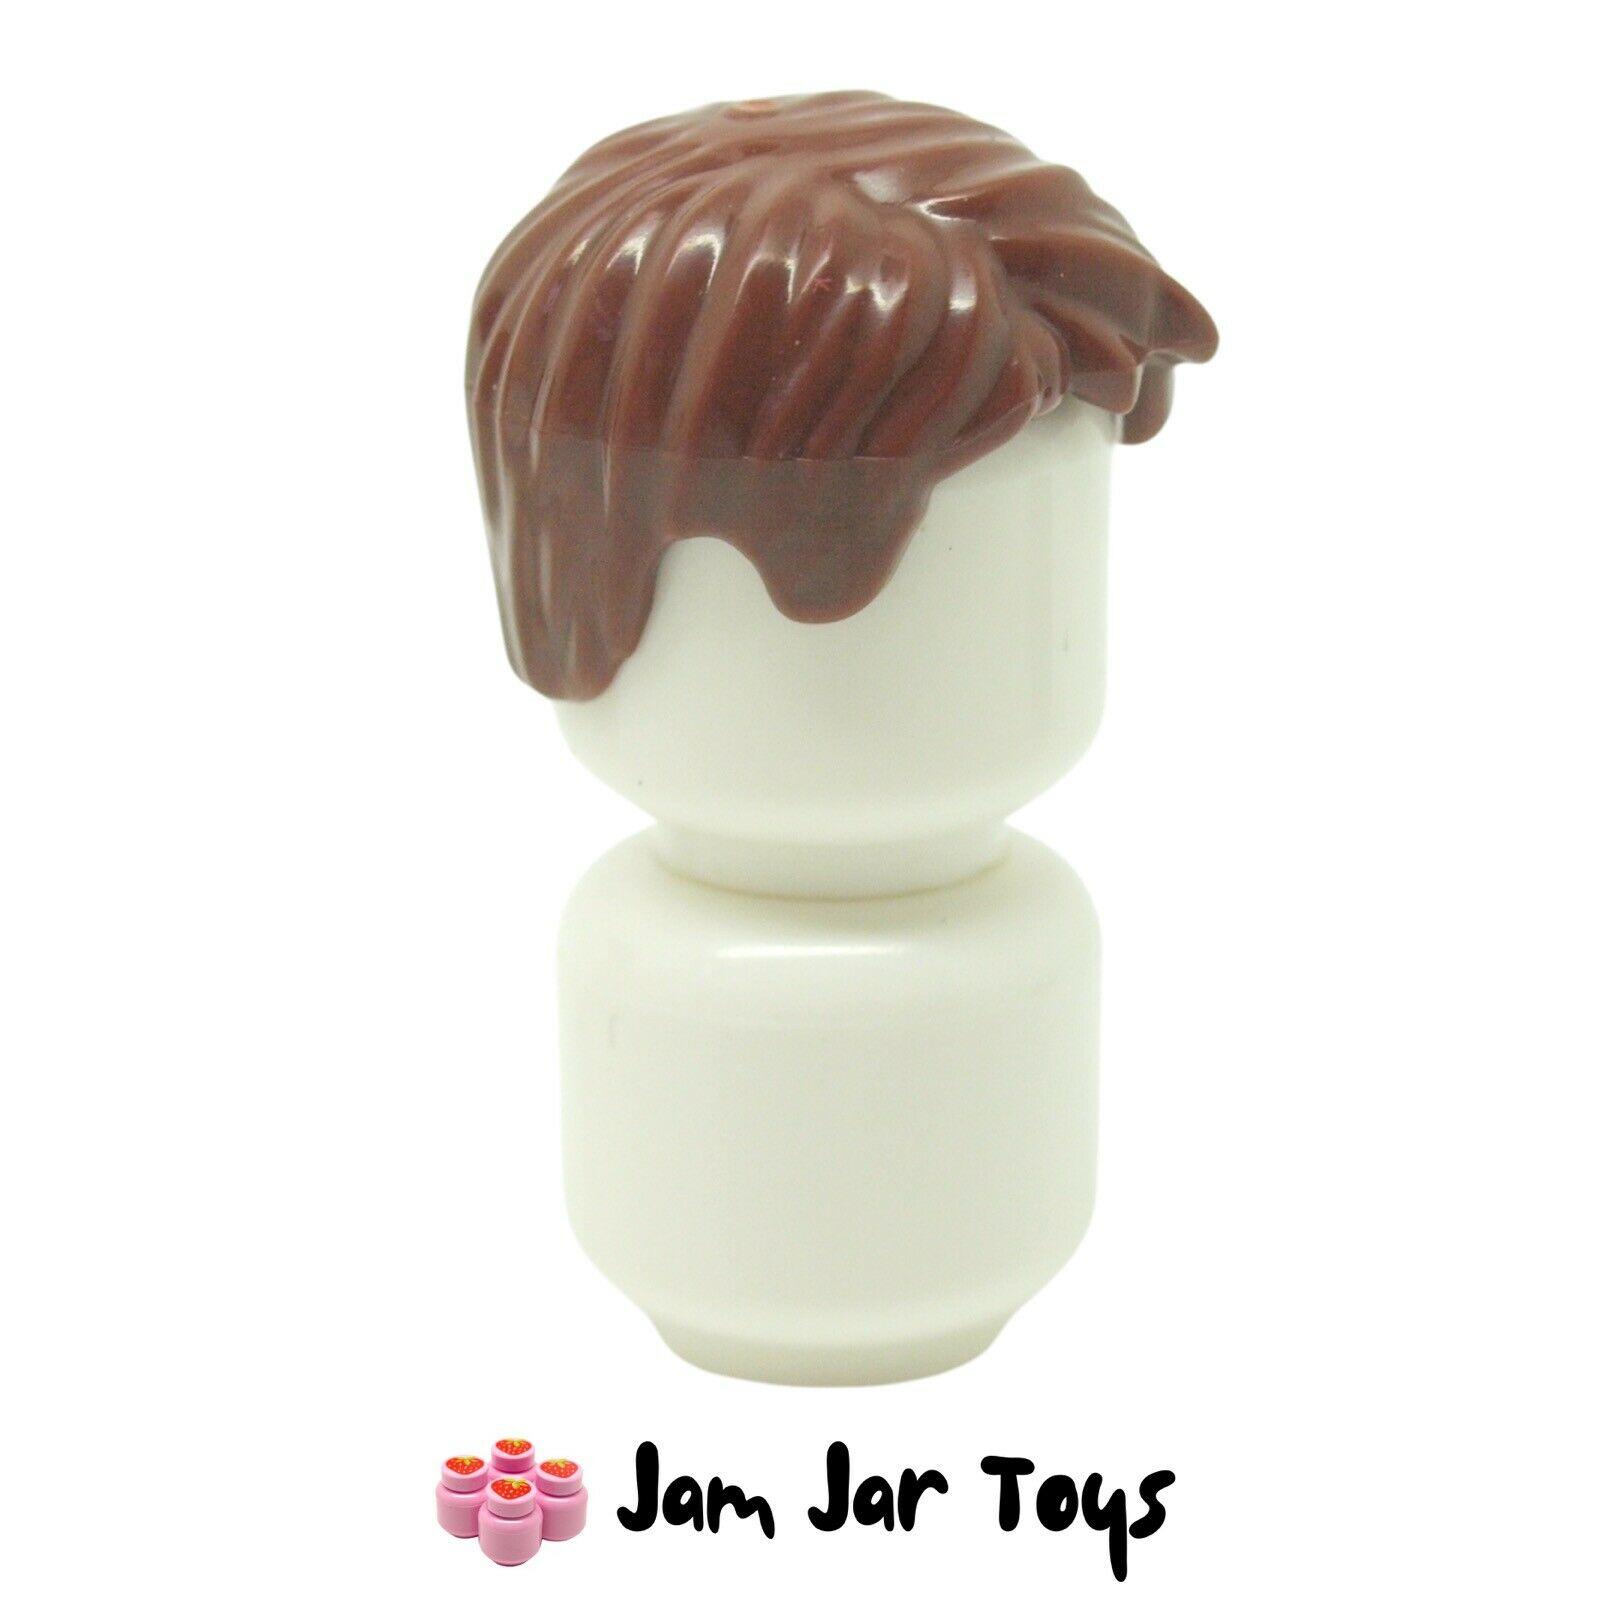 Lego New Reddish Brown Minifigure Hair Short Tousled with Side Part Piece 